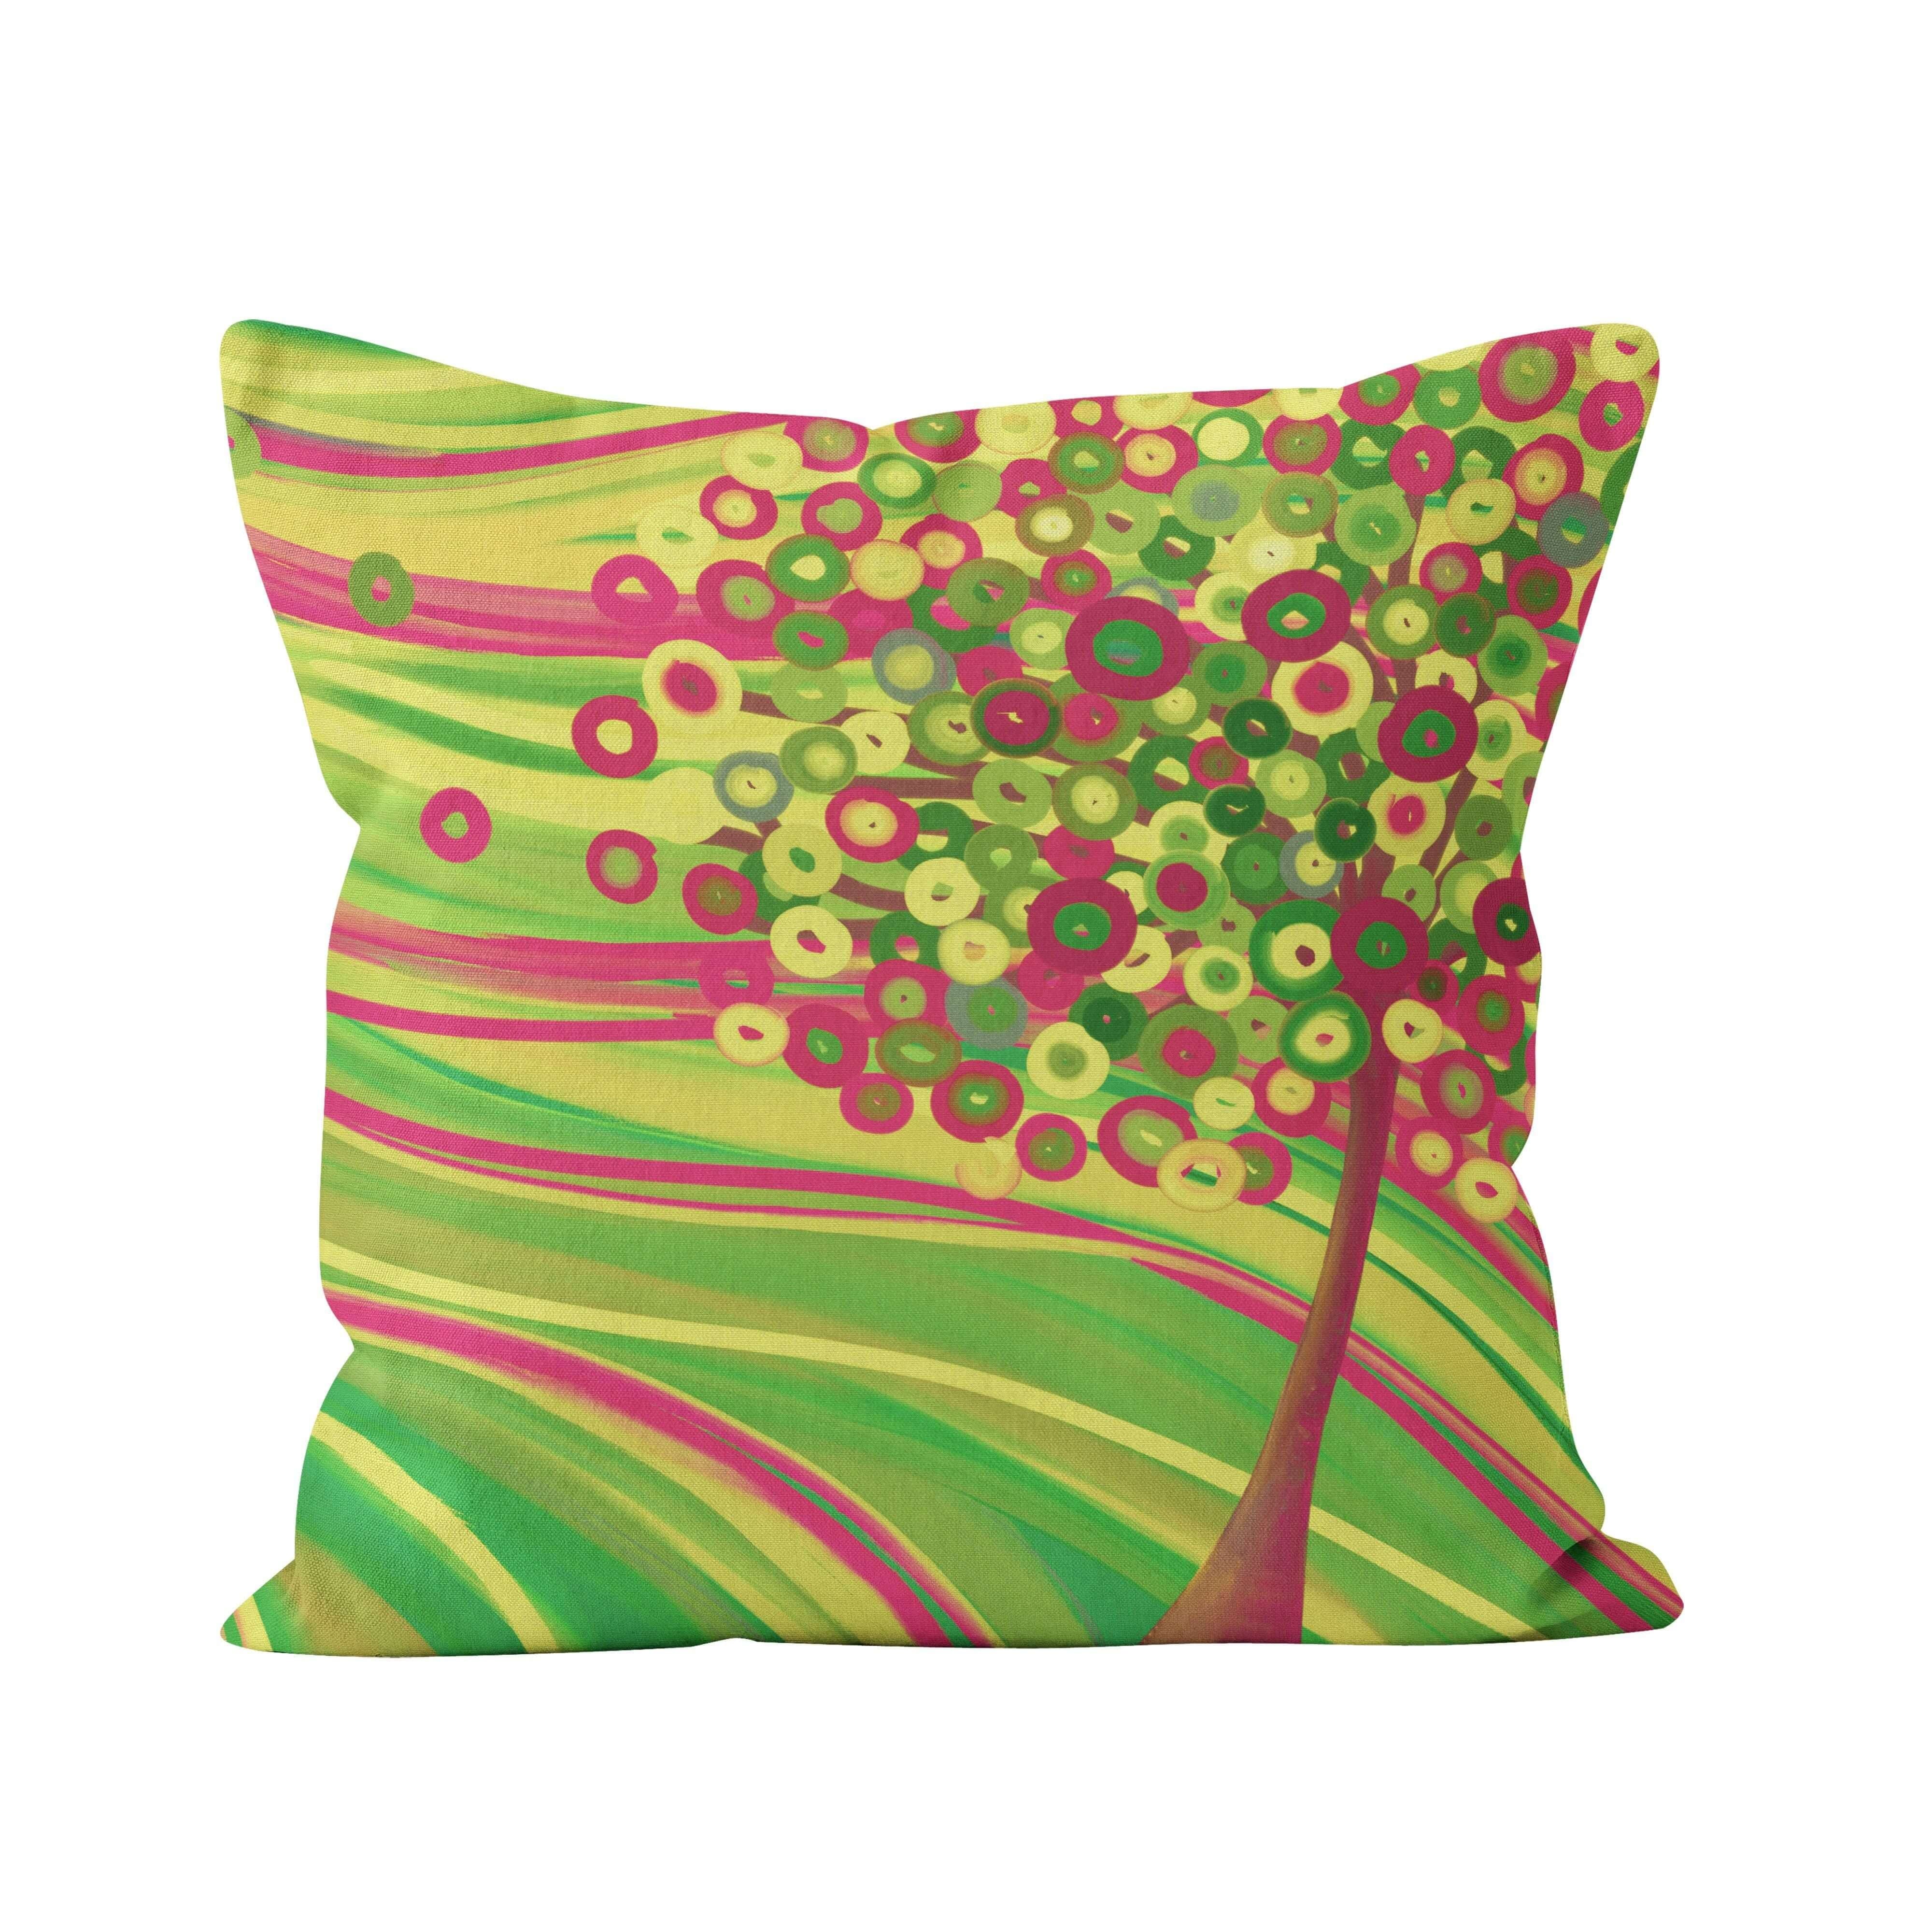 'In Spring' Square Cushion | Square Cushion | Louise Mead